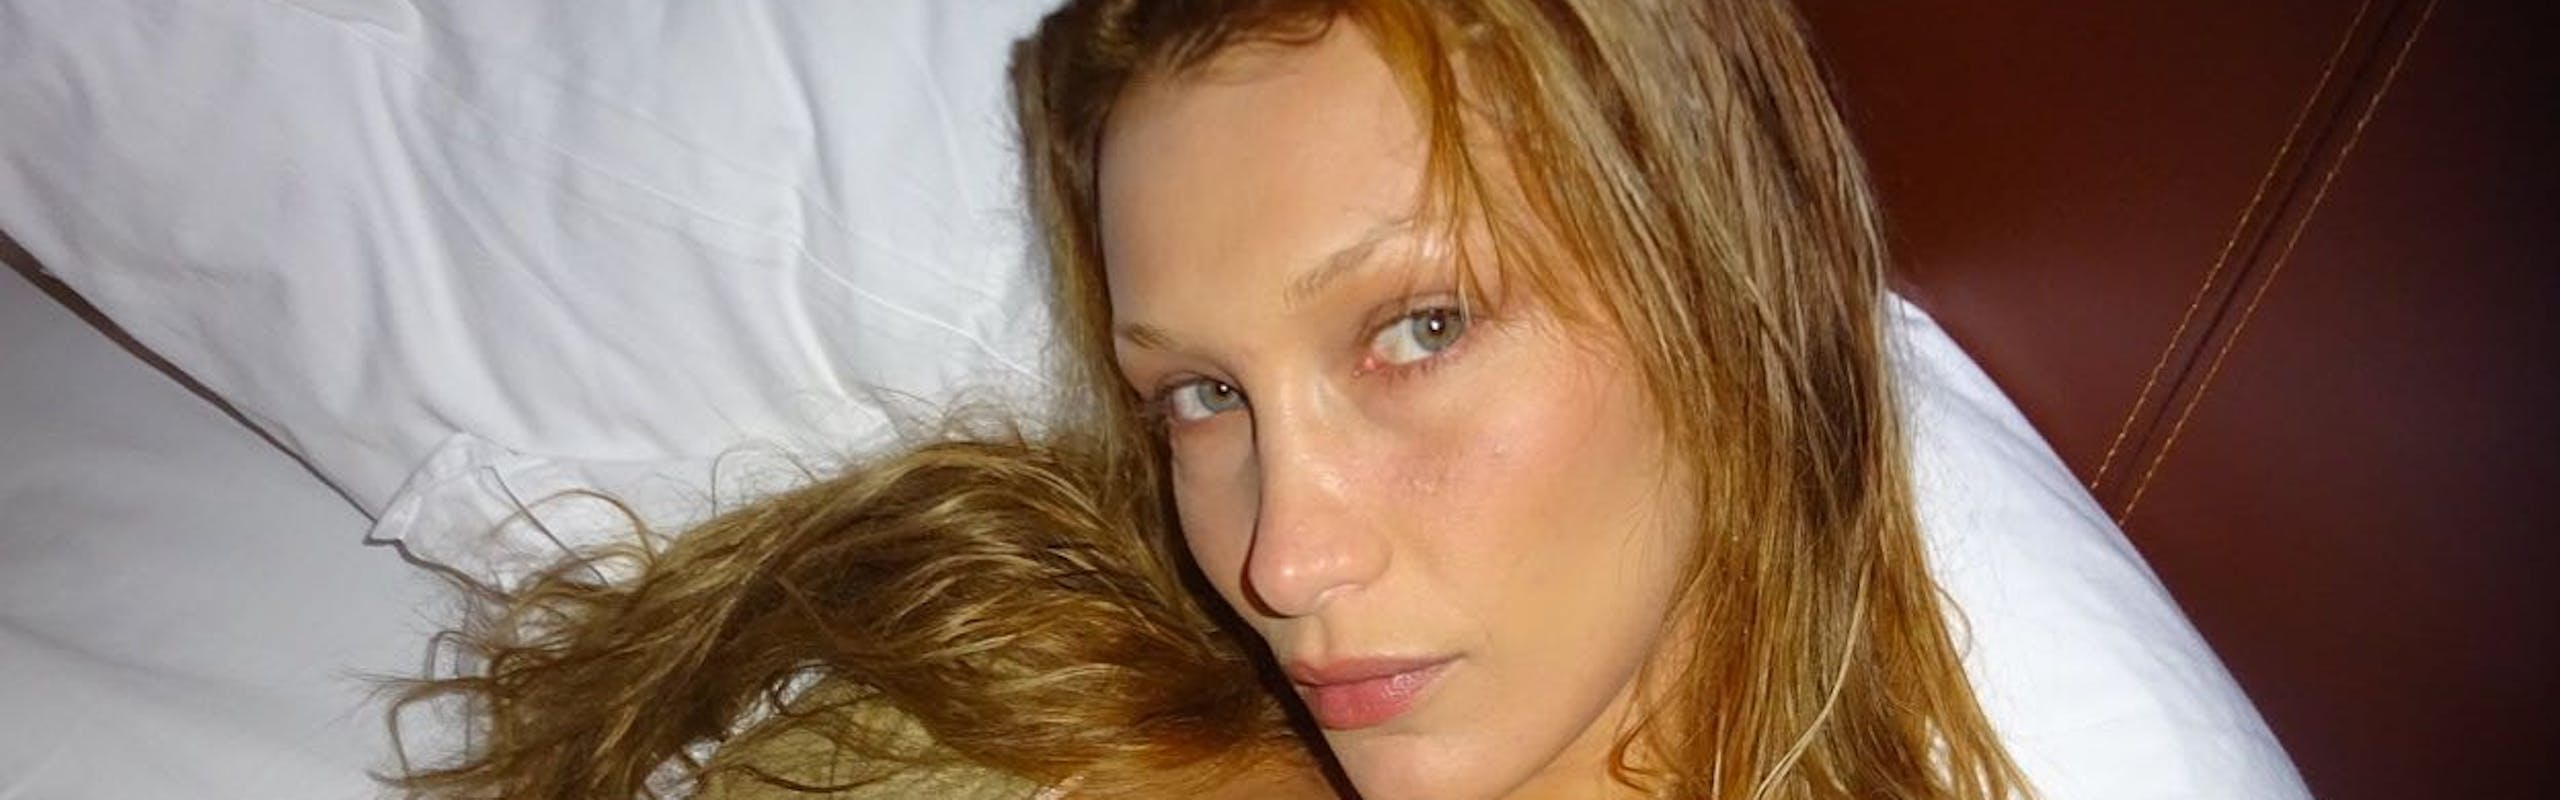 Bella Hadid in green top laying on bed with fresh skin and blonde hair.